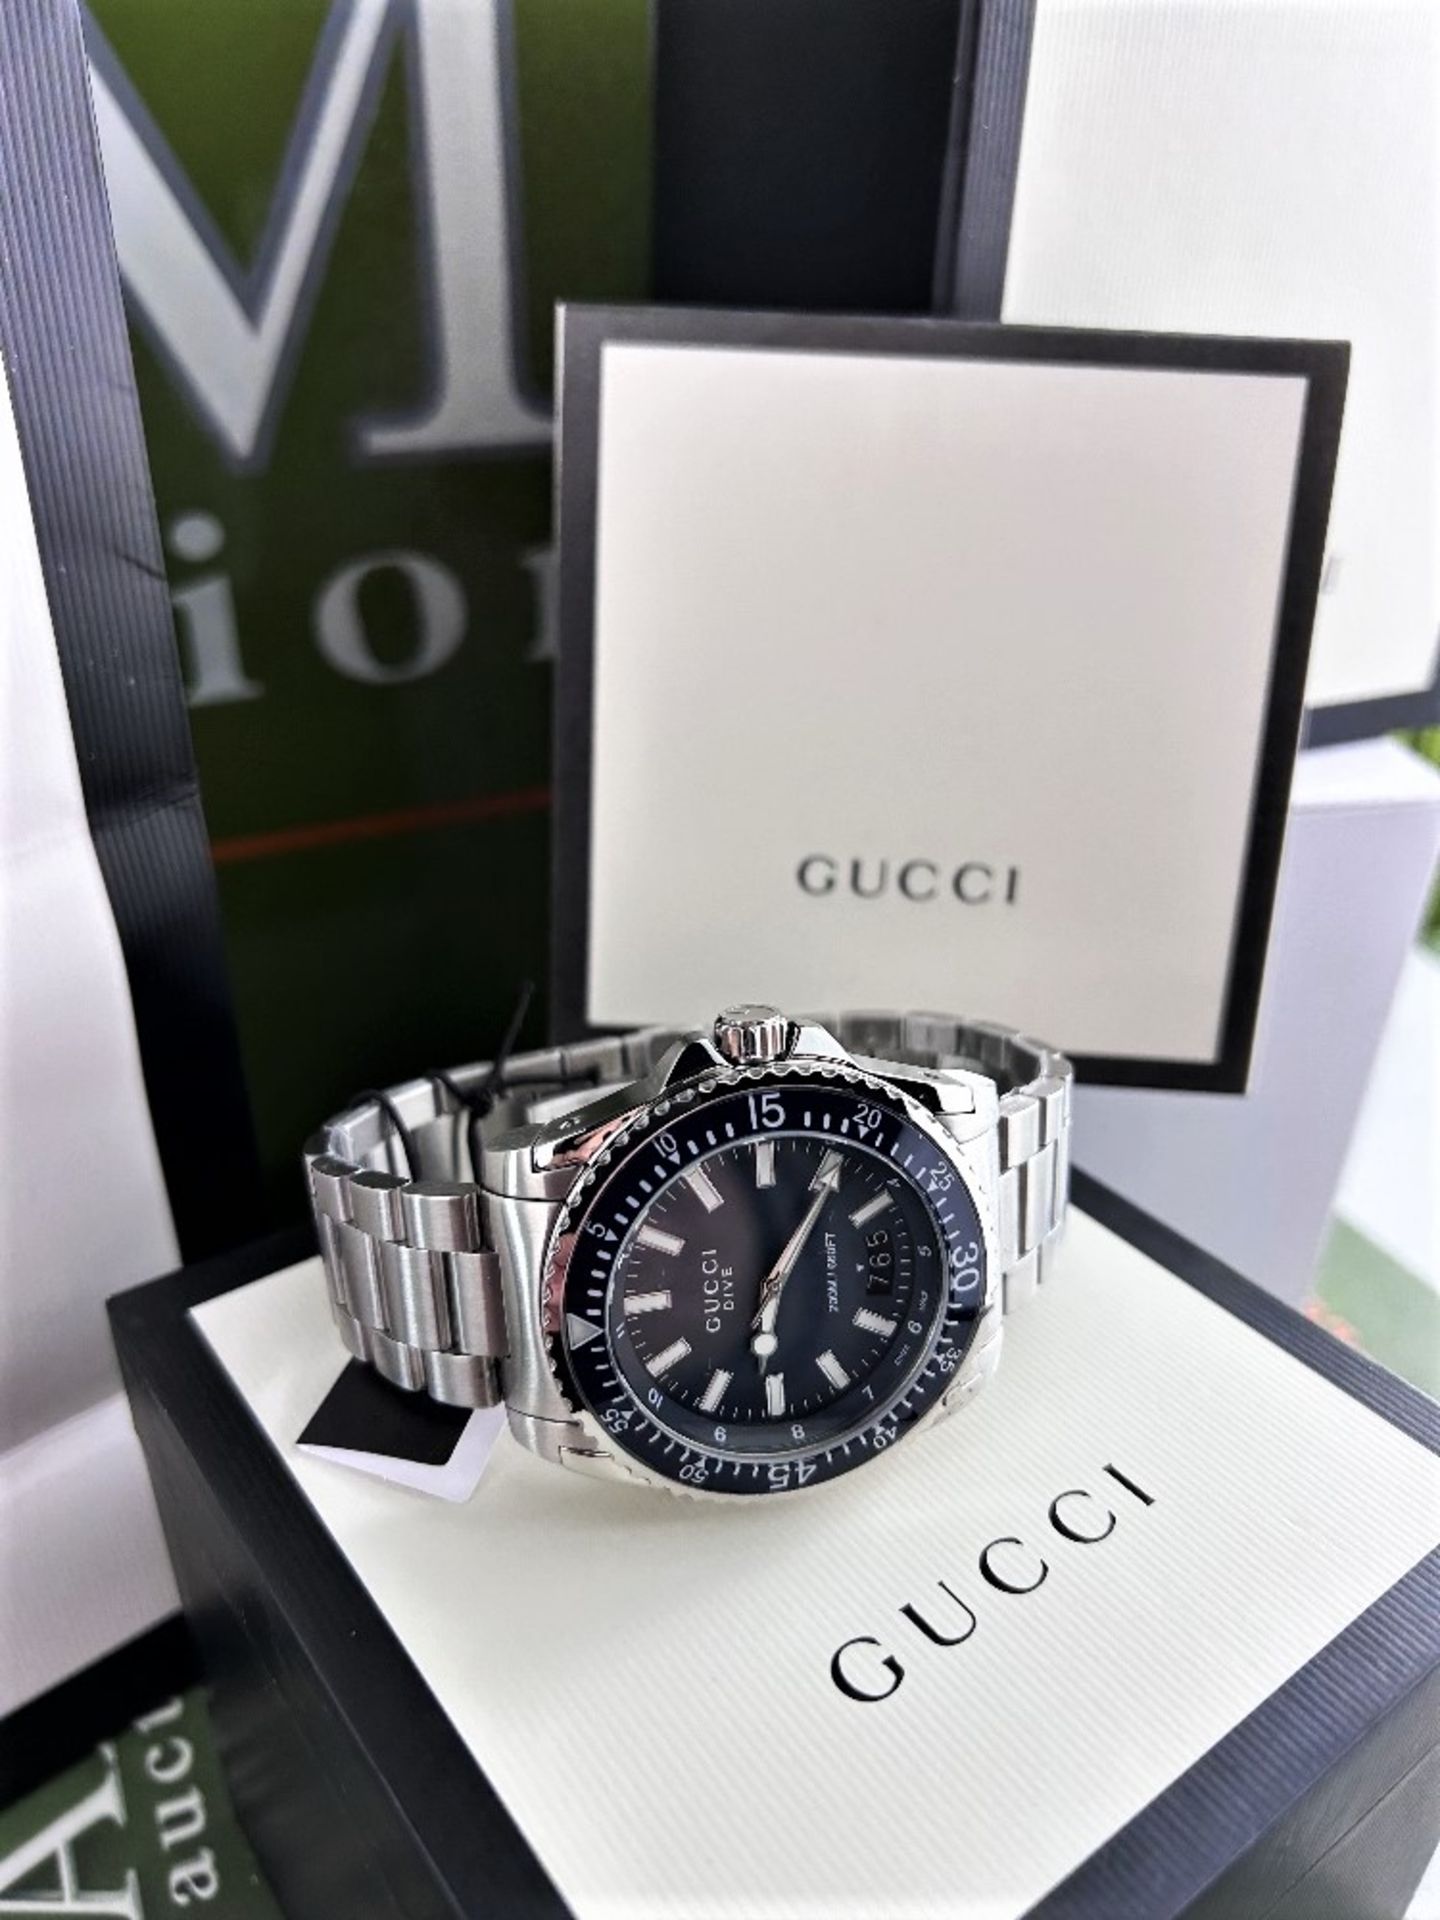 Gucci Dive Stainless Steel Blue Dial Quartz Watch 45mm - Image 8 of 8